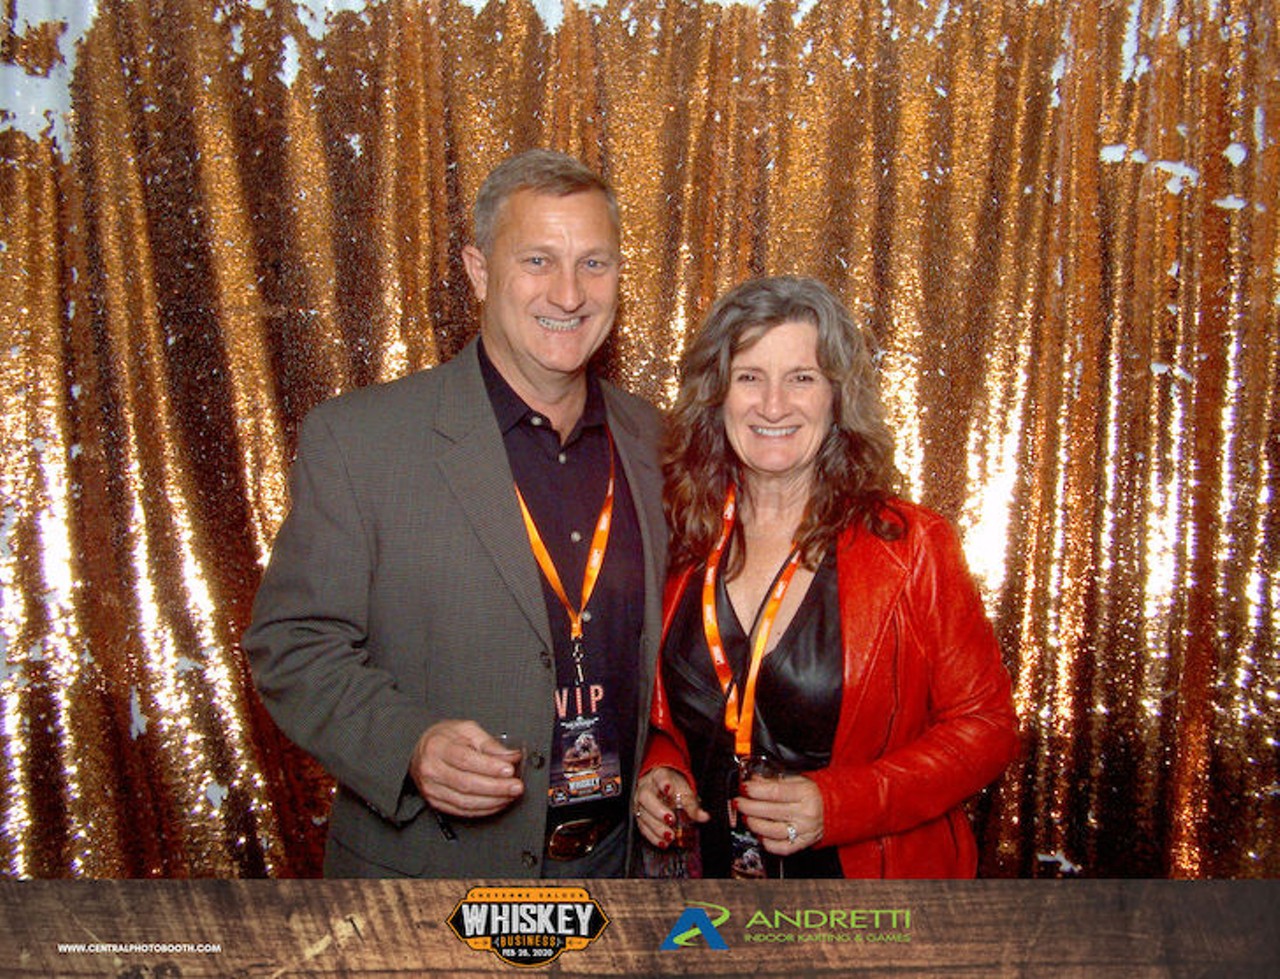 All the smiling faces at Whiskey Business 2020 Andretti Indoor Karting photo booth!